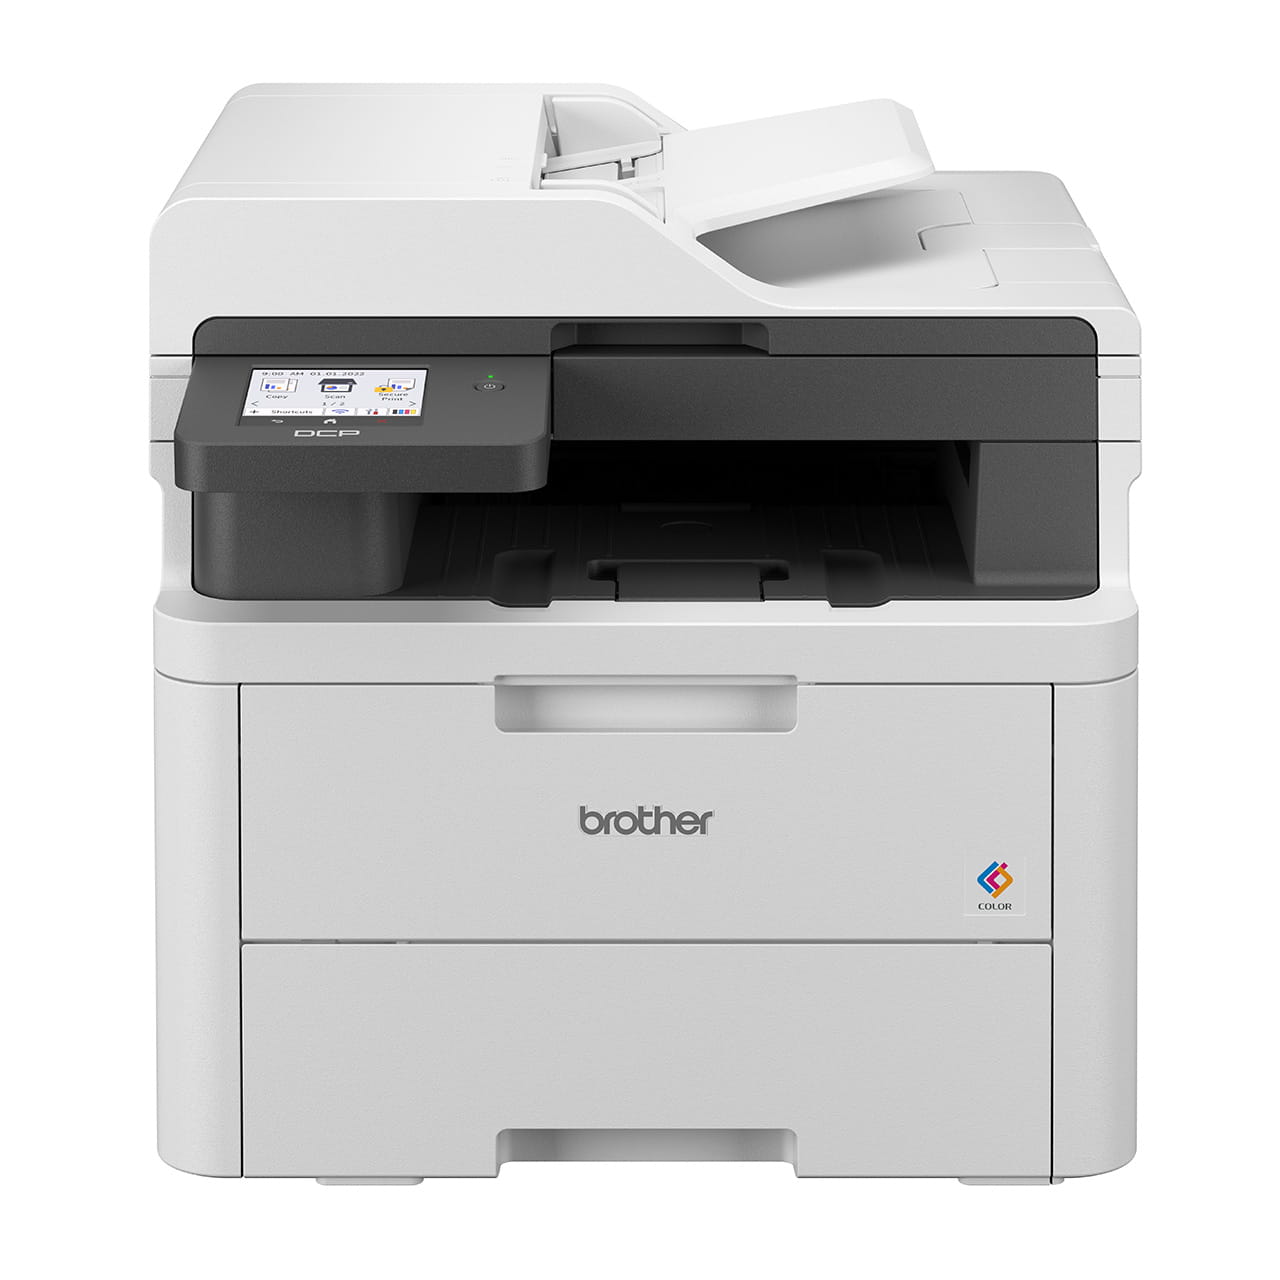 Brother DCP-L3560CDW Colour Laser Printer Front View